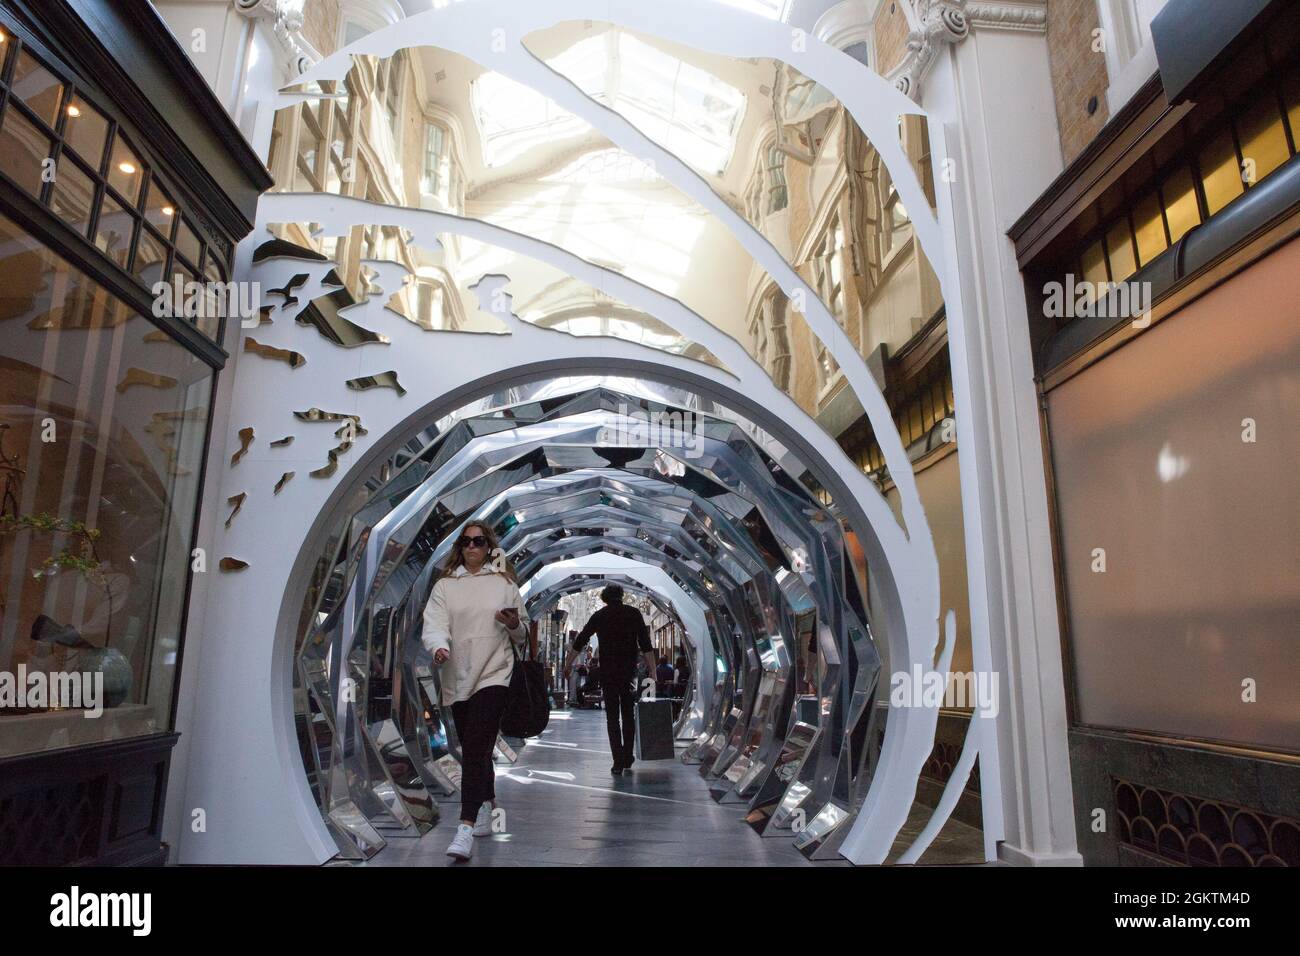 London, UK, 15 September 2021: With the new James Bond film No Time to Die set to be released in UK cinemas on 30 September, Mayfair's Burlington Arcade has got into the mood with a mirrored tunnel and gold 007 signage. After repeated delays to the release cinemas are hoping the high-profile film will bring audiences back into cinemas. Anna Watson/Alamy Live News Stock Photo